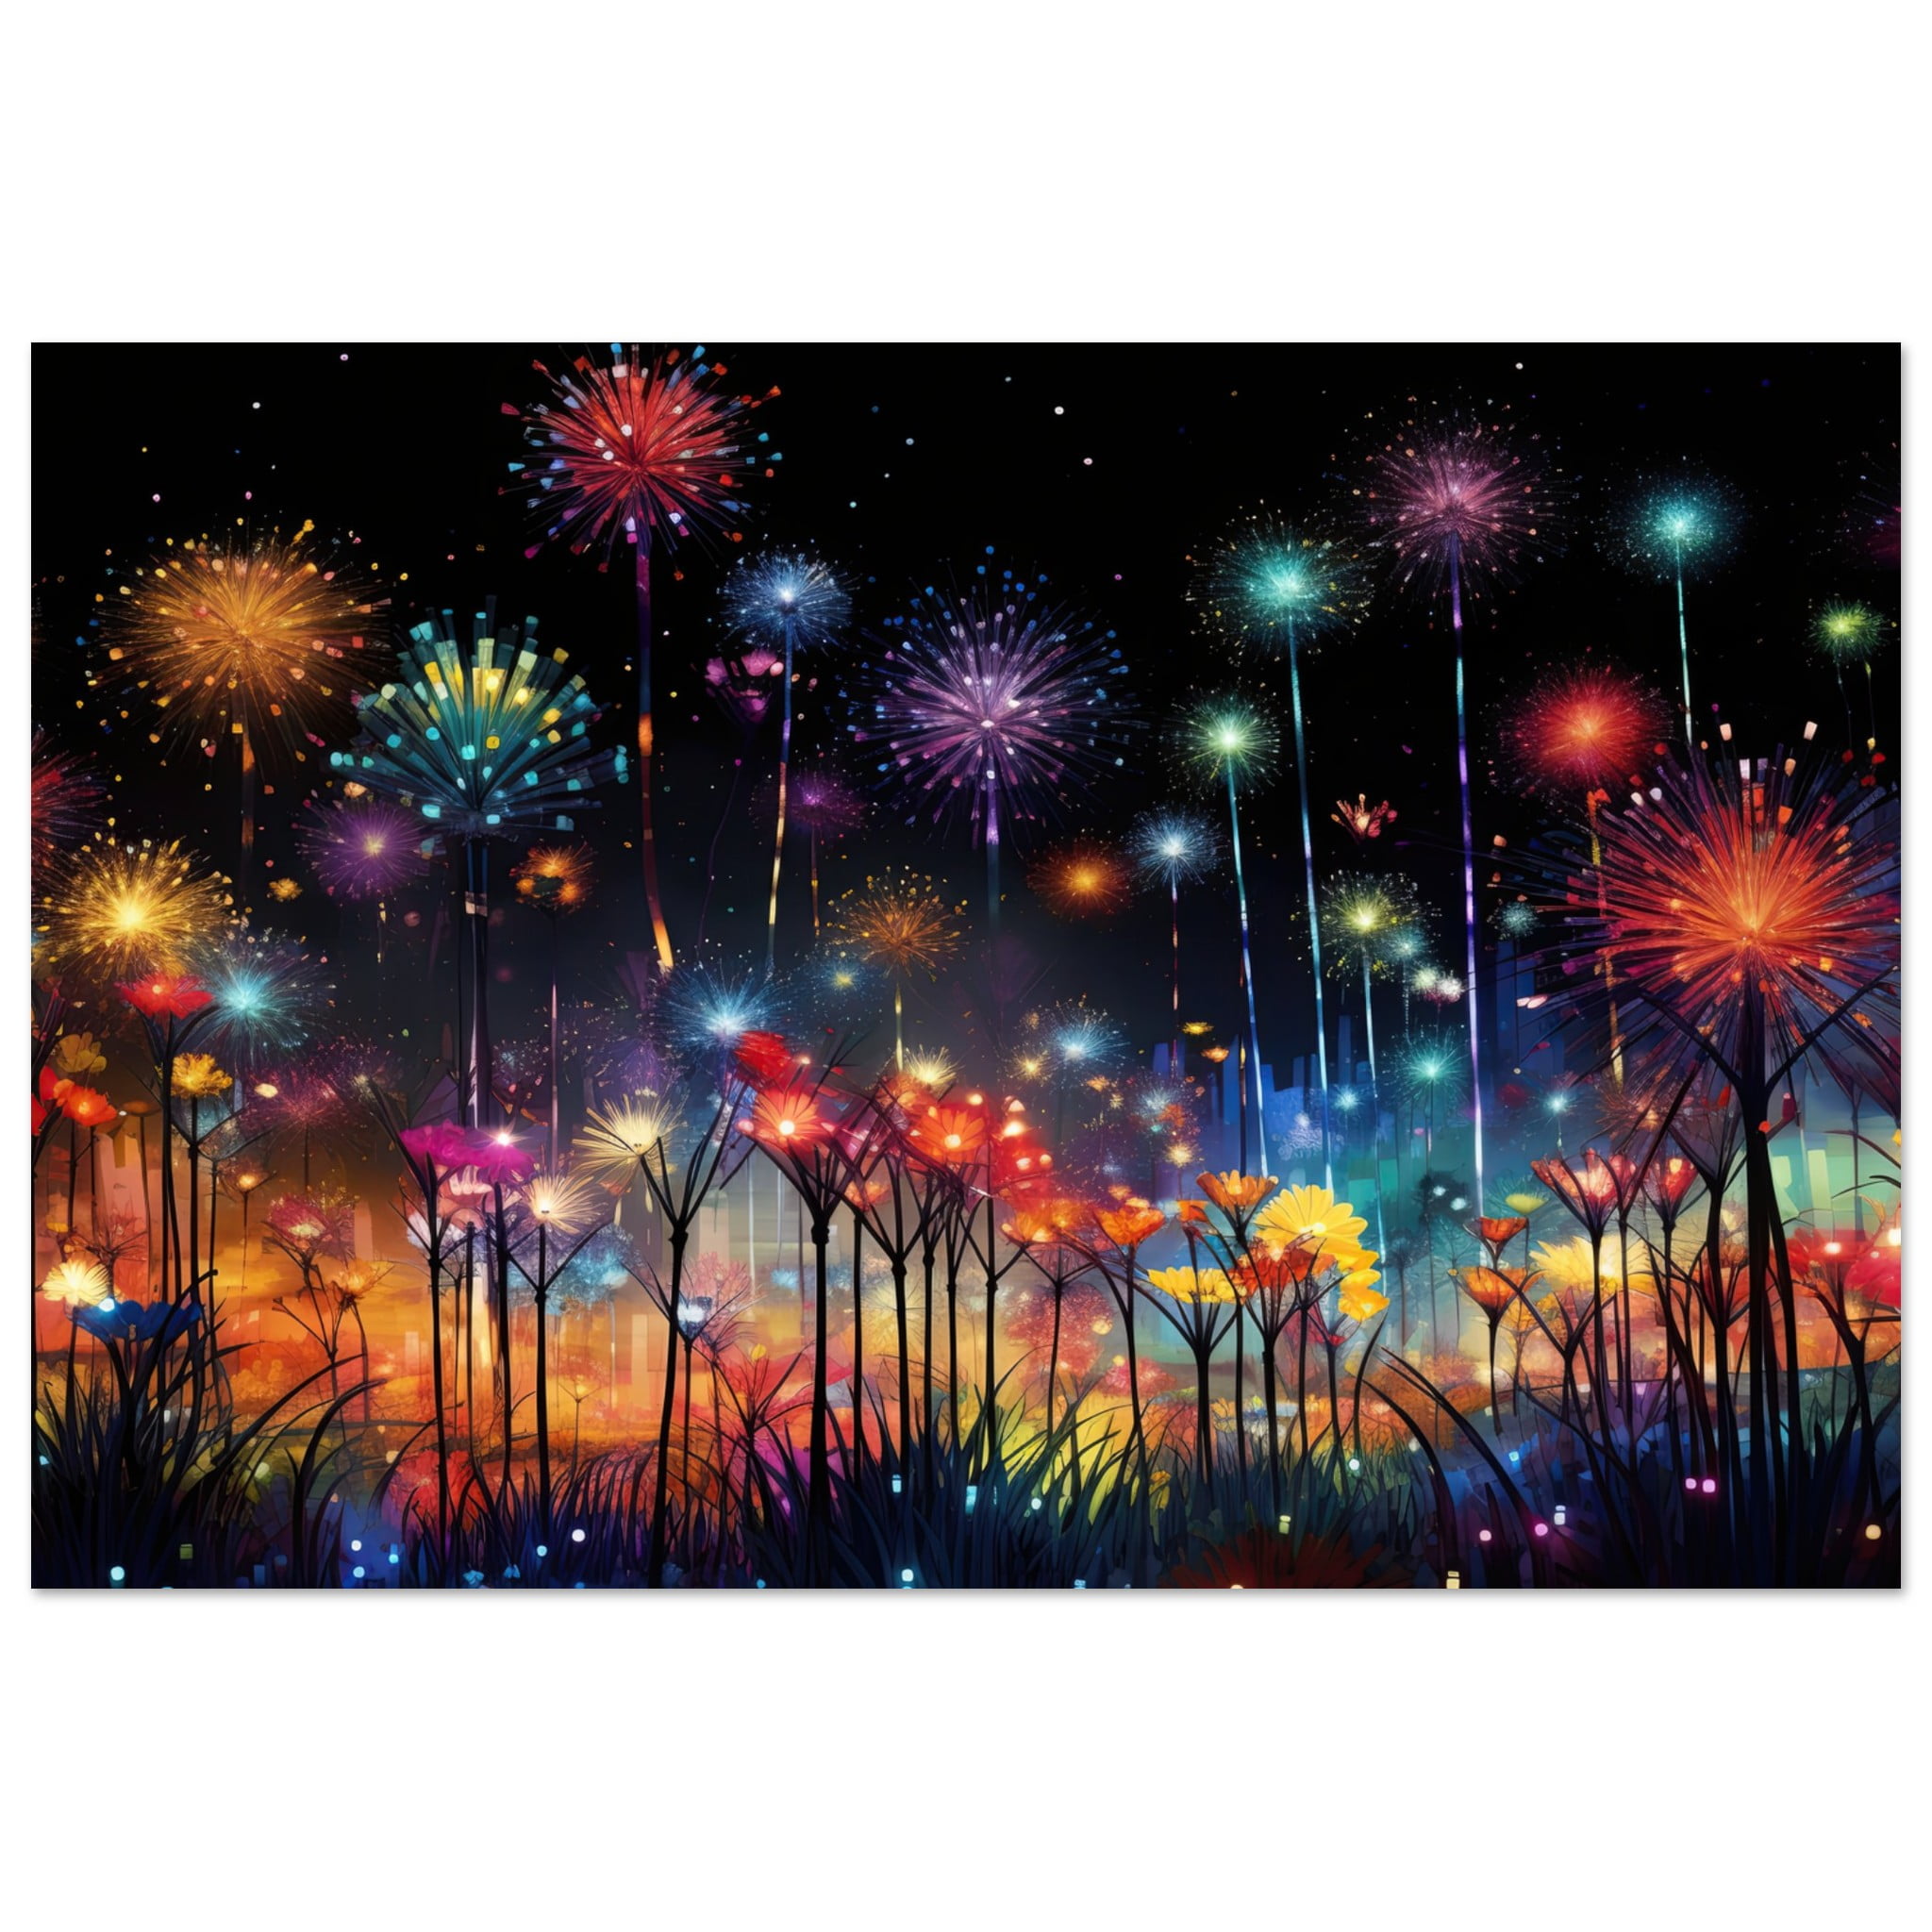 Fireworks and Flowers of Light and Color – Art Metal Print – 20×30 cm / 8×12″